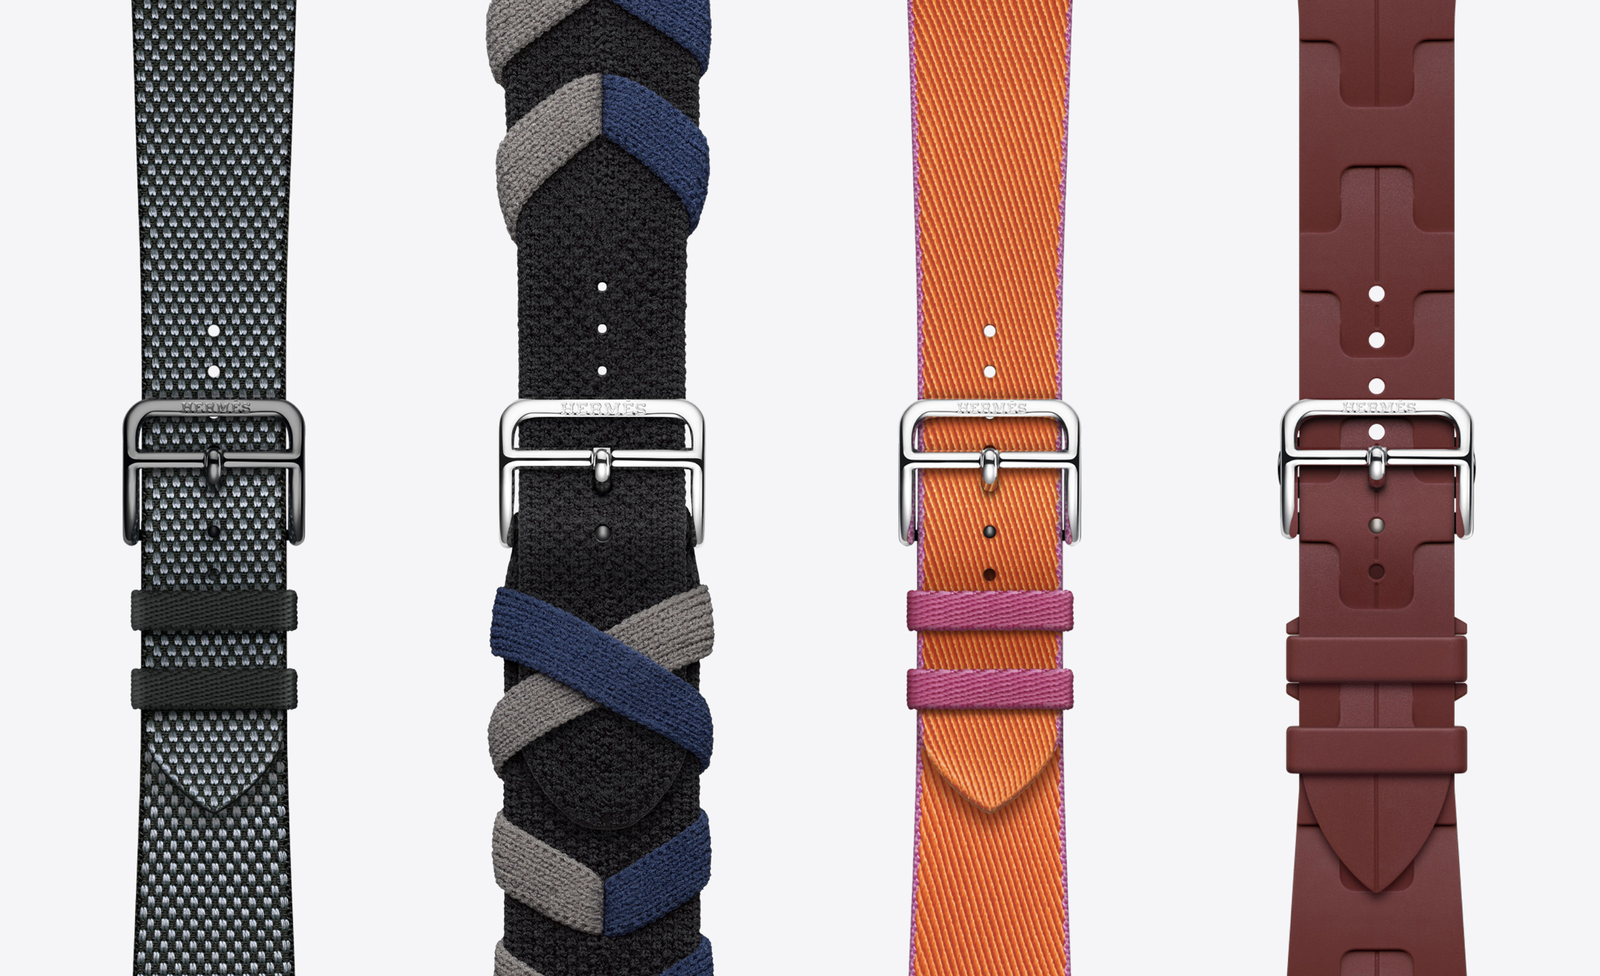 Watch Straps and Bands: A Guide to Different Materials and Styles